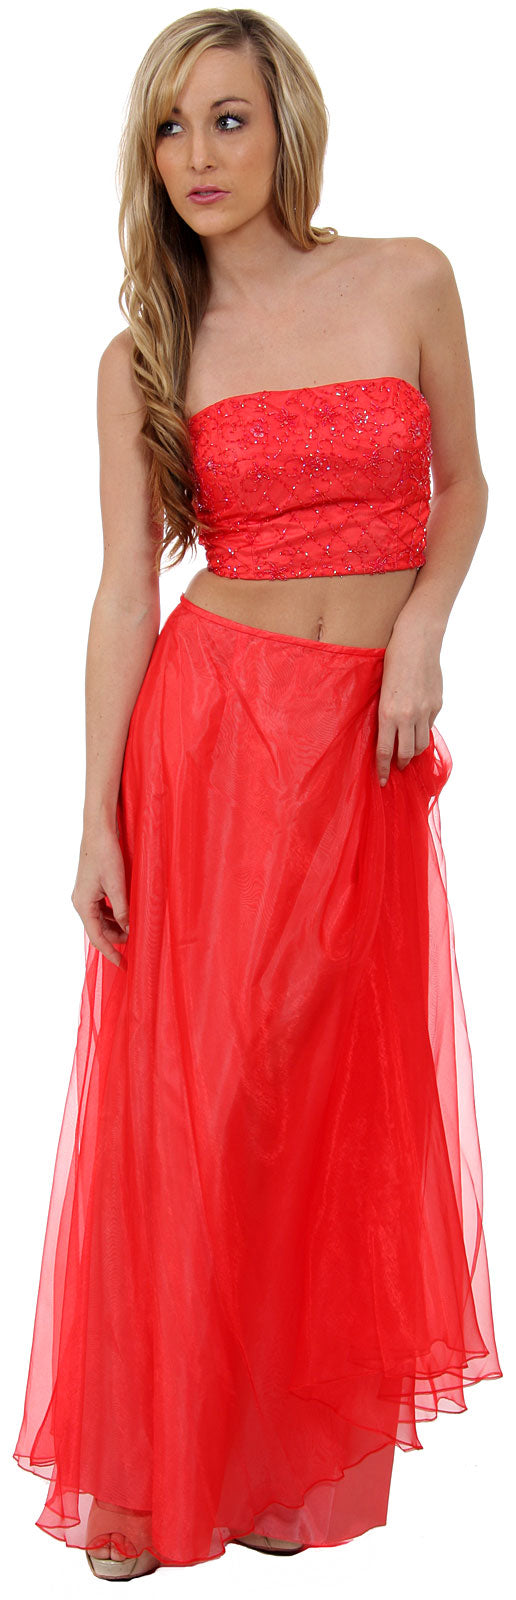 Main image of Criss Crossed Strapless 2 Pc Dress